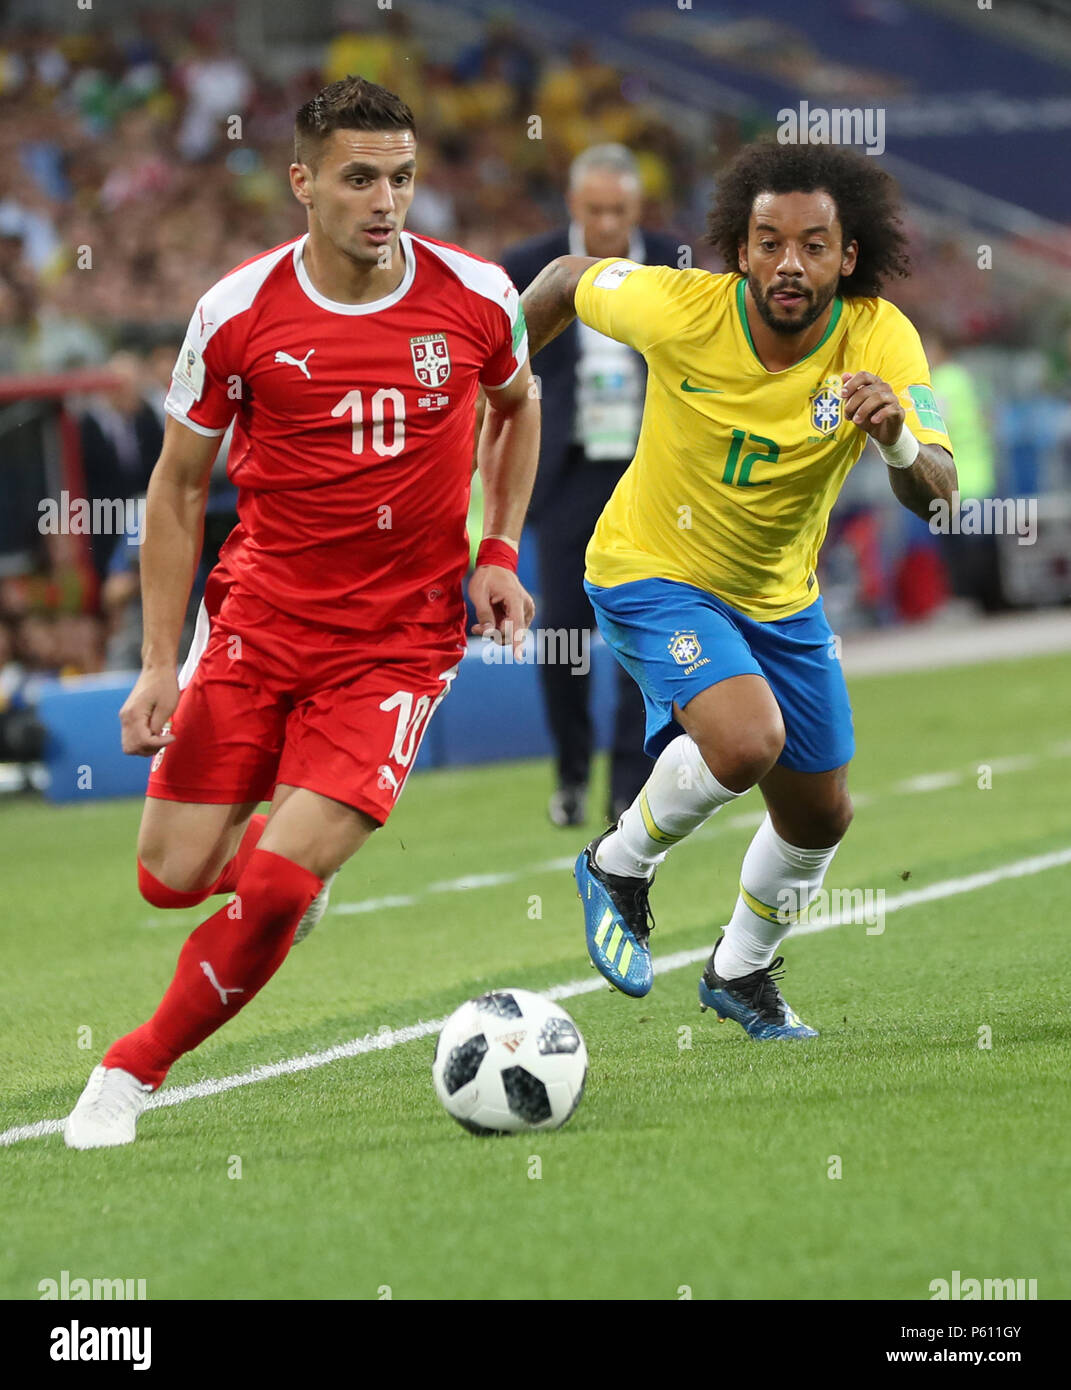 Moscow, Russia. 27th June, 2018. Marcelo (R) of Brazil vies with Dusan Tadic of Serbia during the 2018 FIFA World Cup Group E match between Brazil and Serbia in Moscow, Russia, June 27, 2018. Credit: Xu Zijian/Xinhua/Alamy Live News Stock Photo